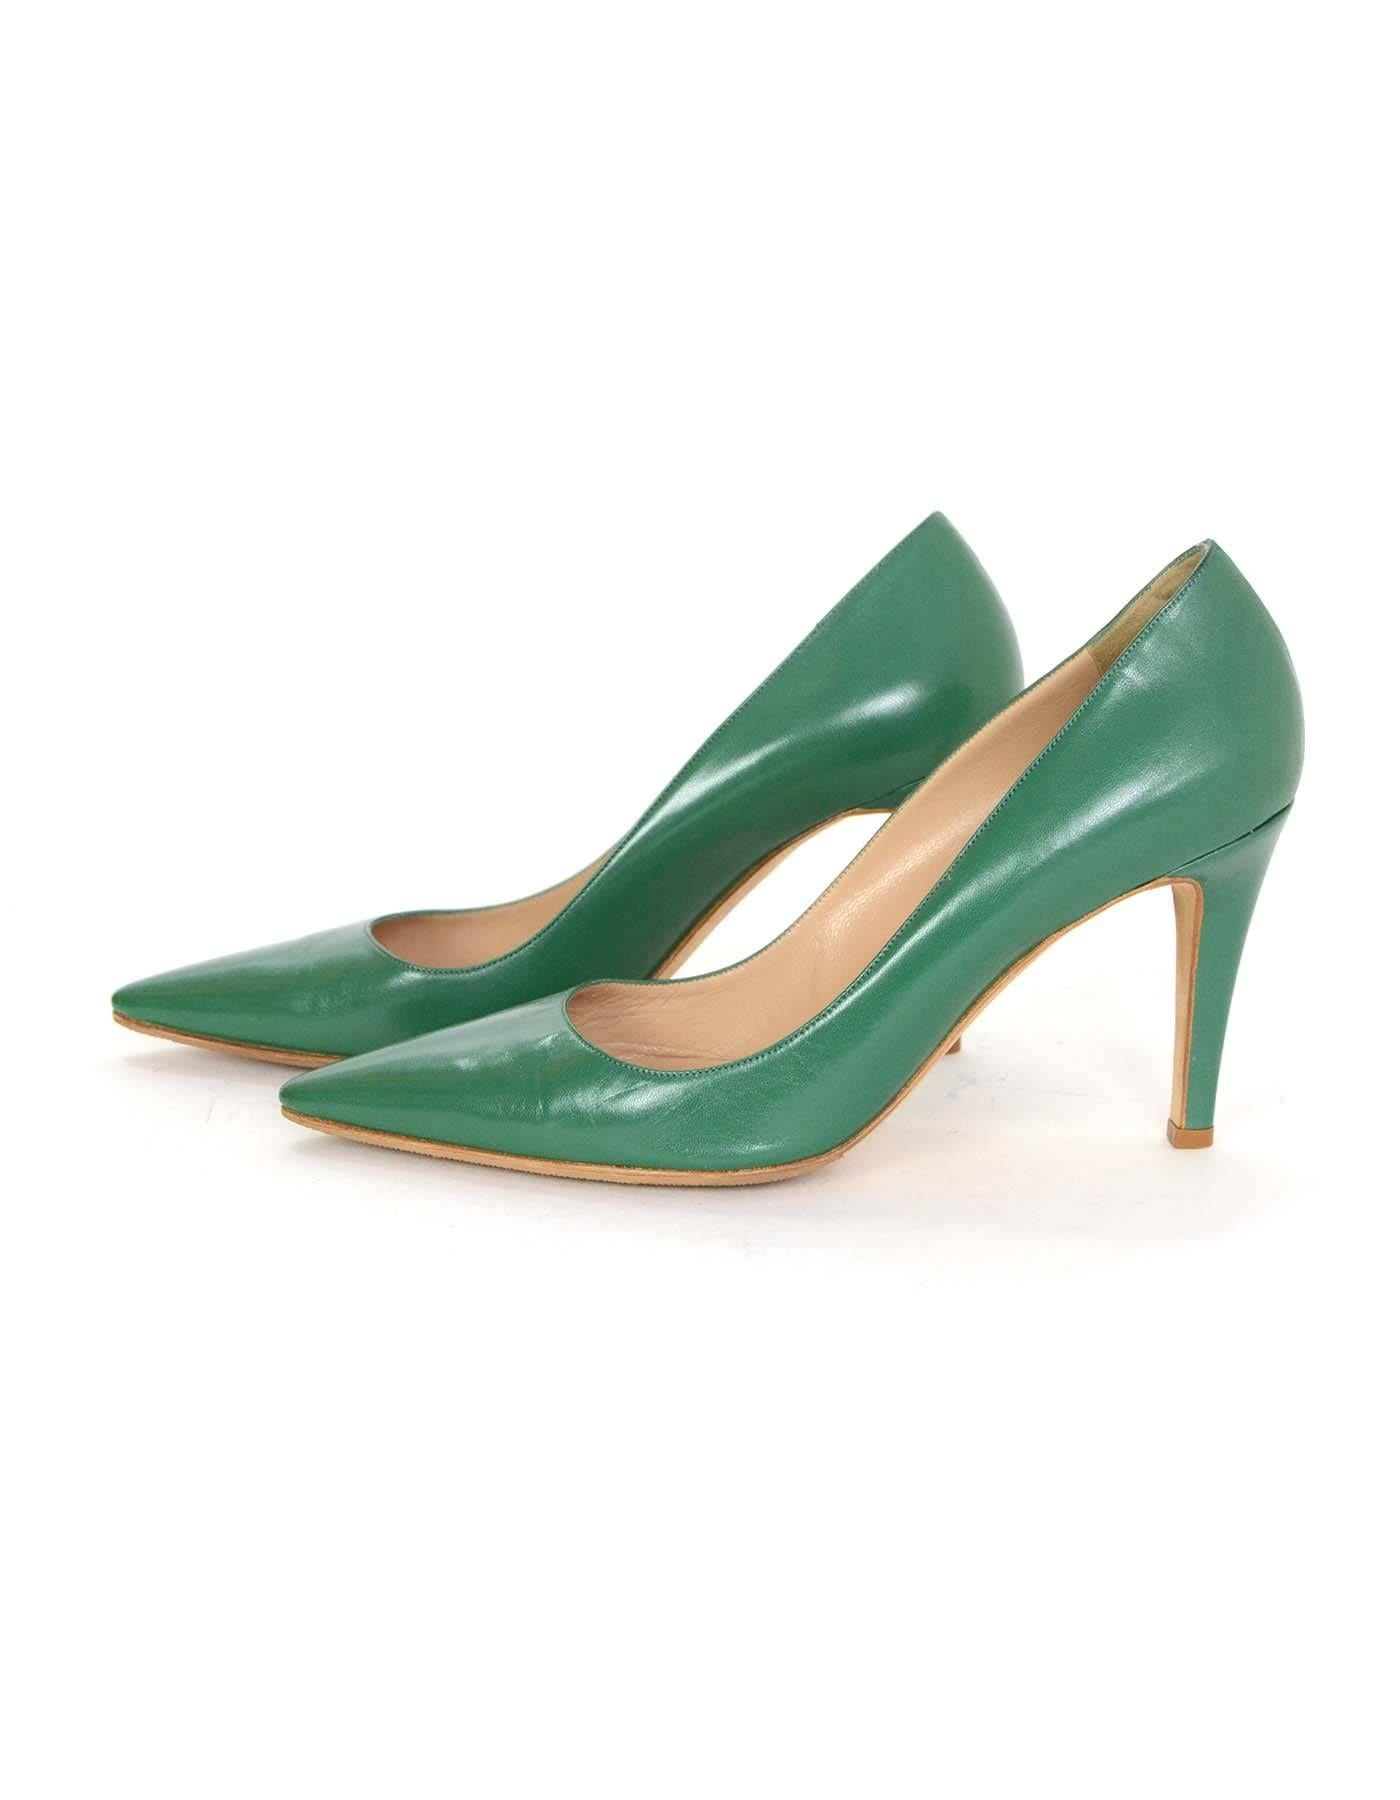 Manolo Blahnik Green Leather Pumps Sz 40.5

Color: Green
Materials: Leather
Closure/Opening: Slide on
Sole Stamp: Manolo Blahnik 40.5
Overall Condition: Excellent pre-owned condition with the exception of being re-soled and creasing at